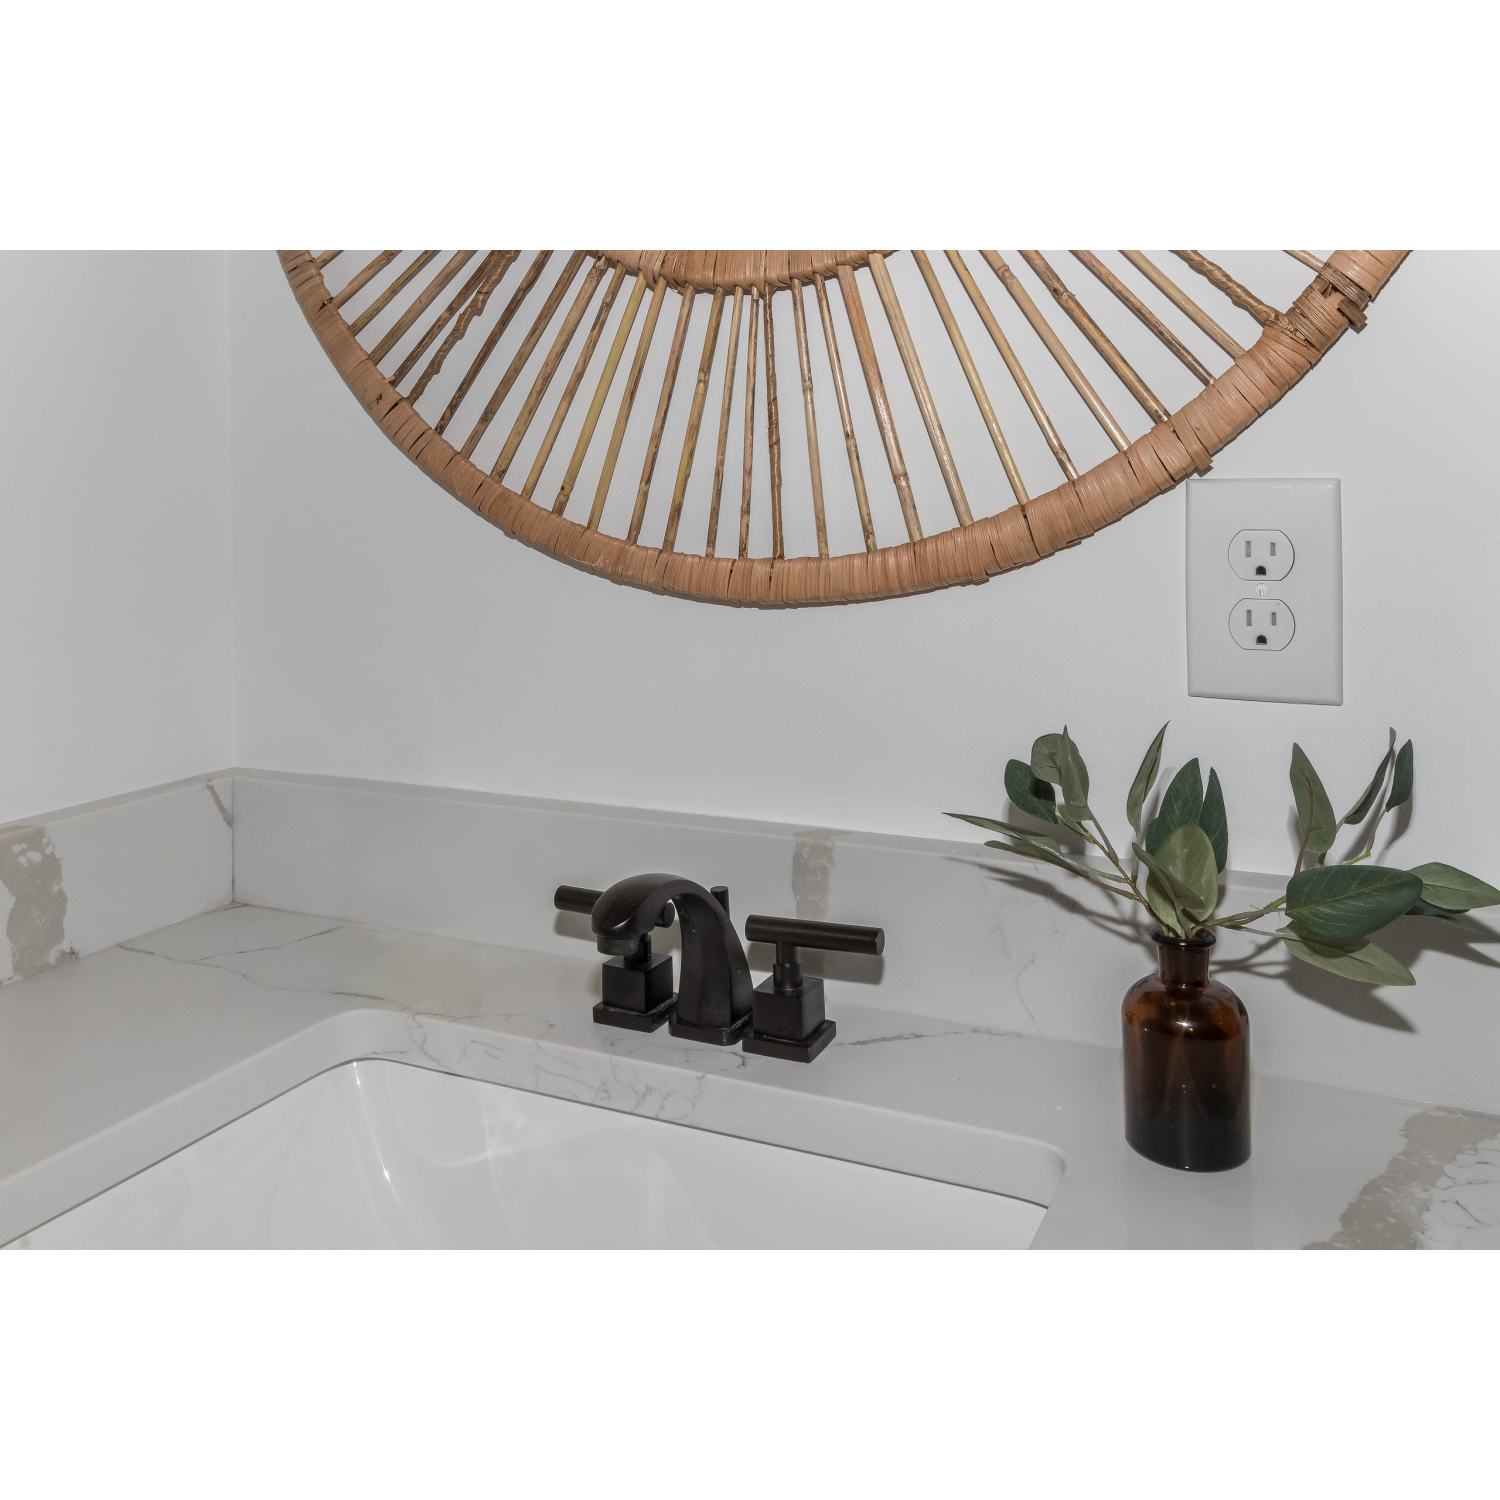 Kingston Brass Claremont 8-Inch Widespread Bathroom Faucet